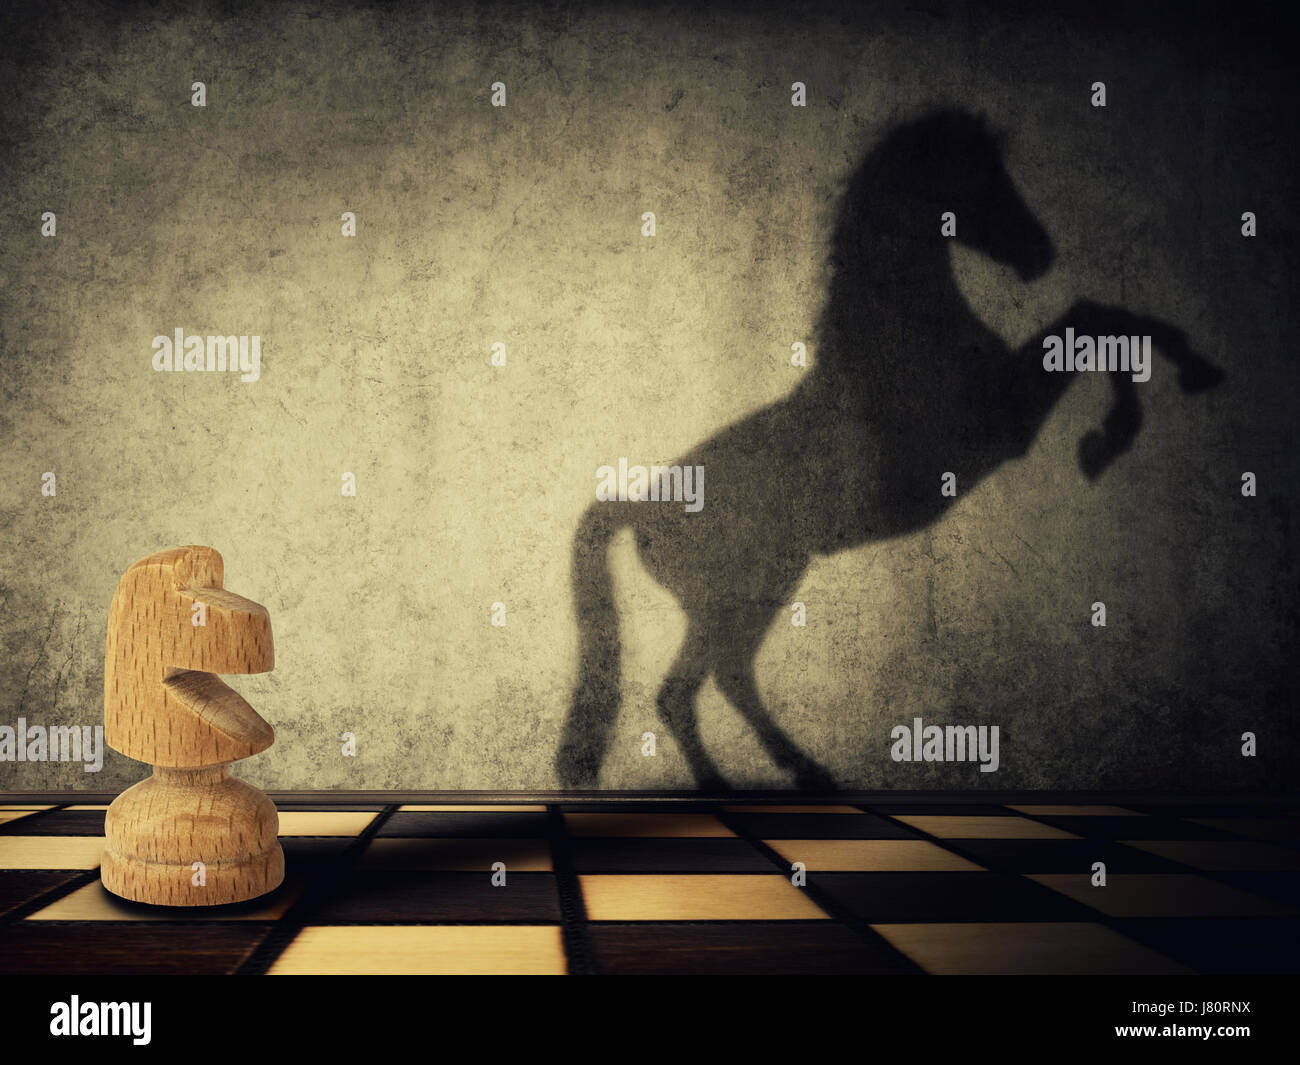 Magical transformation as a wooden knight chess piece casting a shadow of a wild horse on two legs on the wall. Symbol of business aspirations, freedo Stock Photo